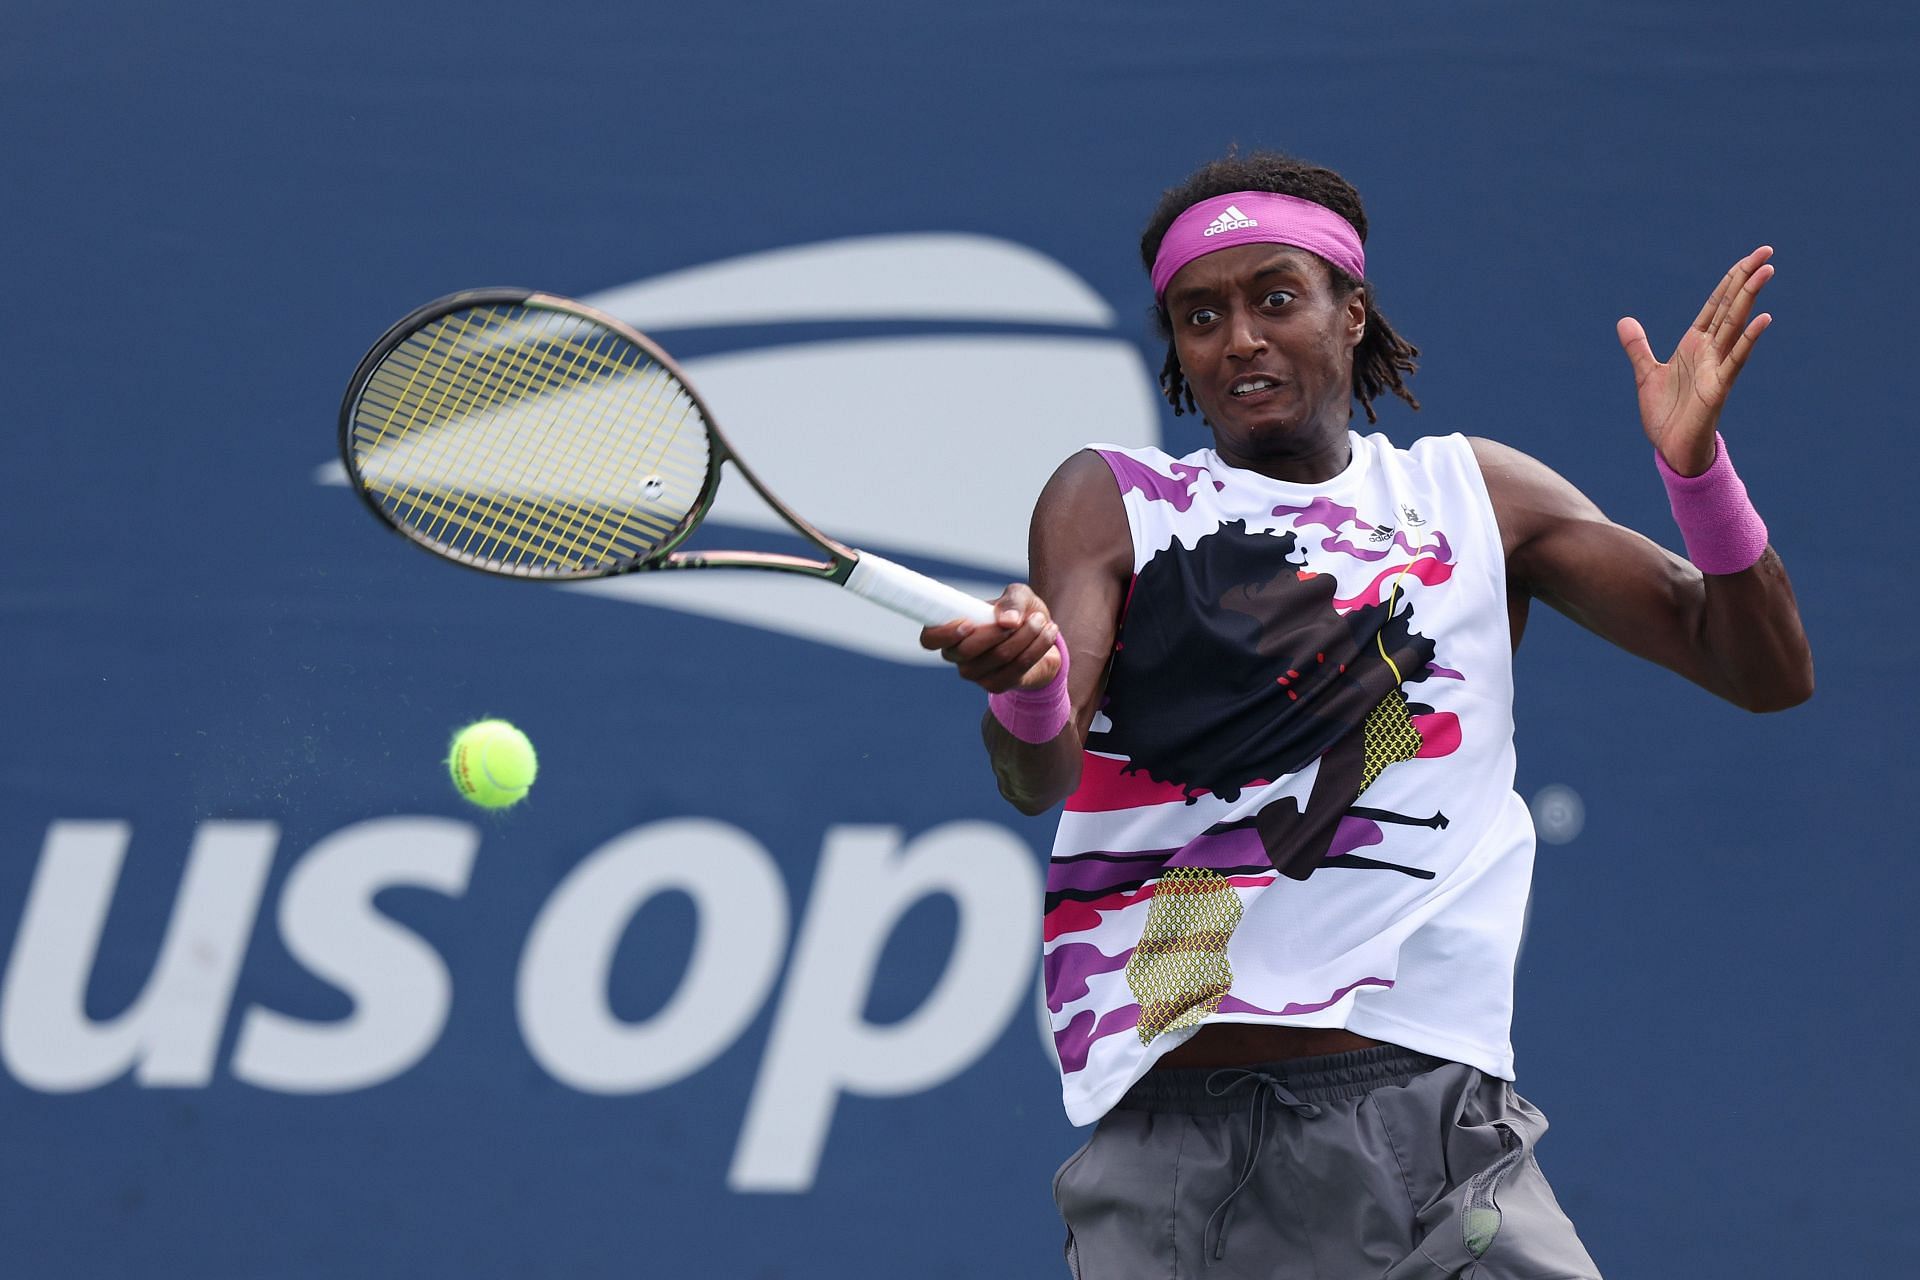 Mikael Ymer in action at the 2022 US Open.